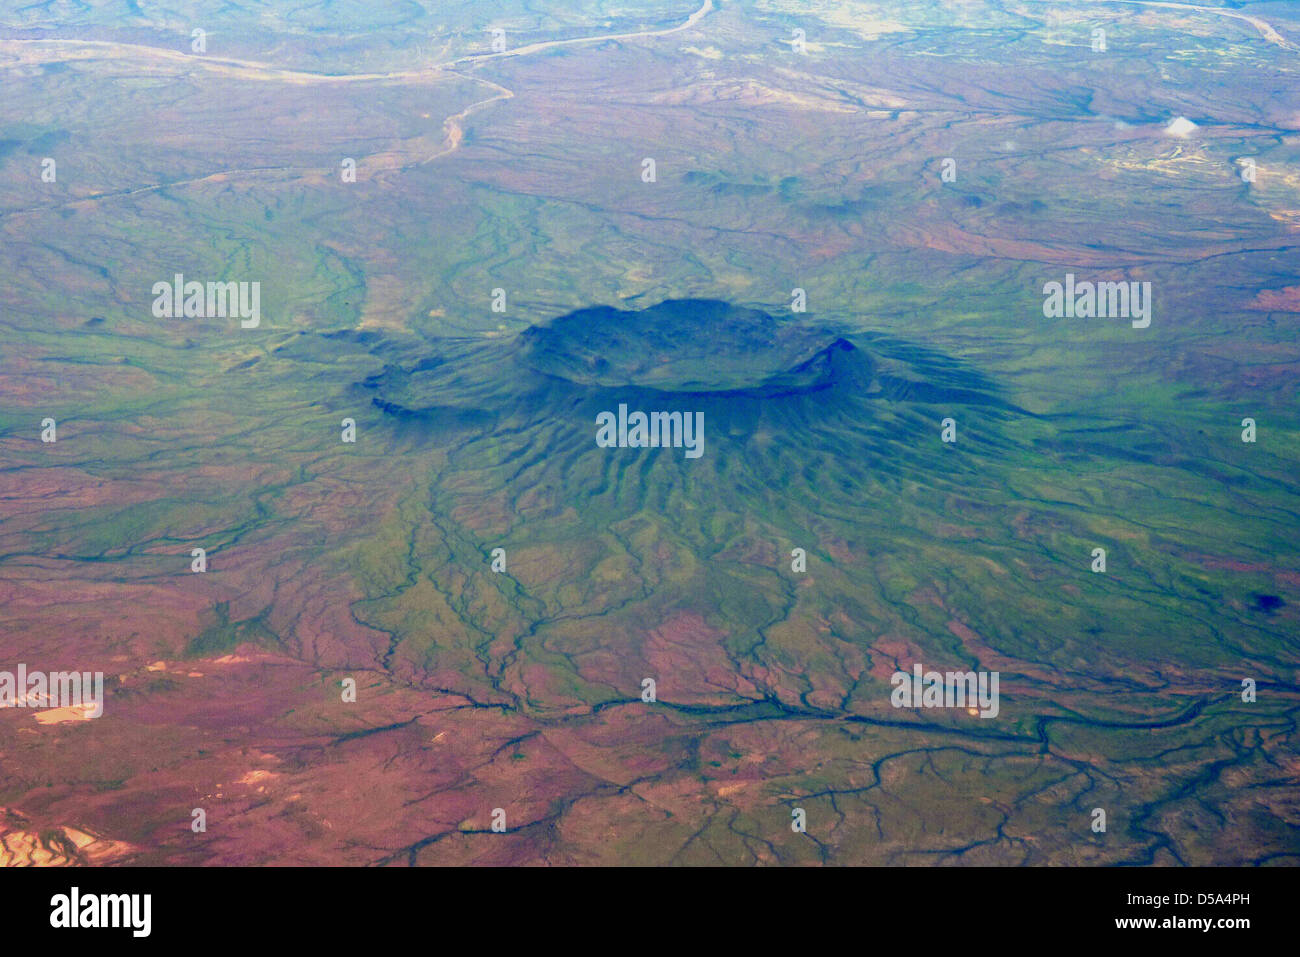 aerial view of a crater in africa Stock Photo